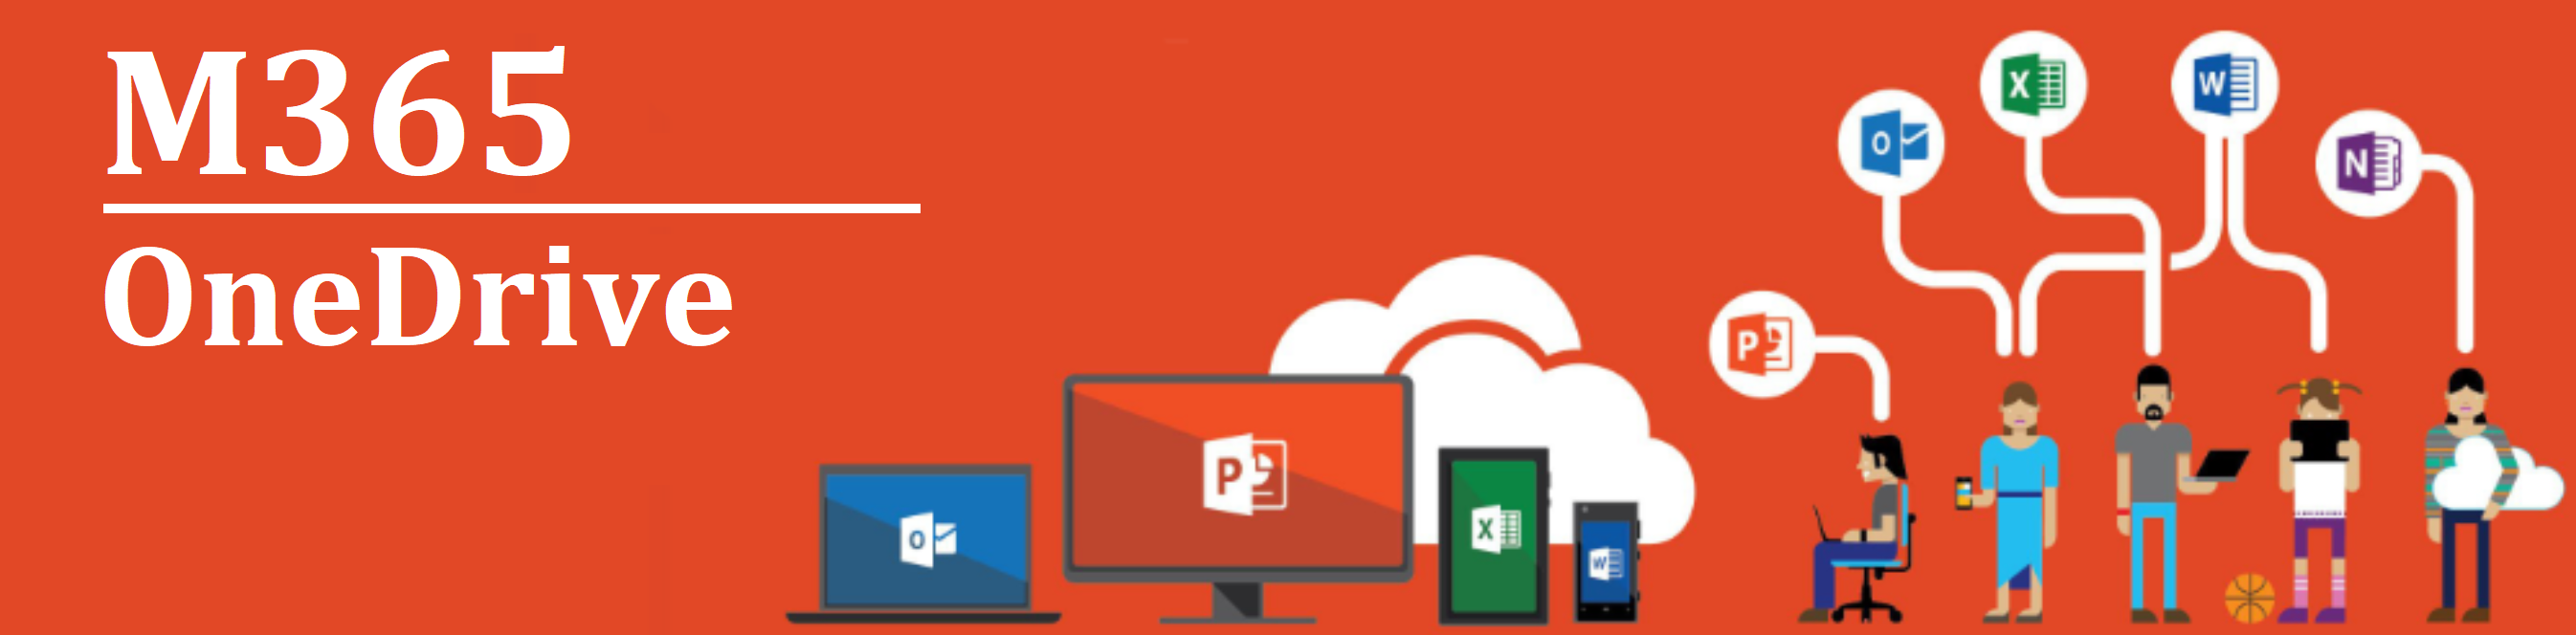 MS365 Banner - OneDrive.png